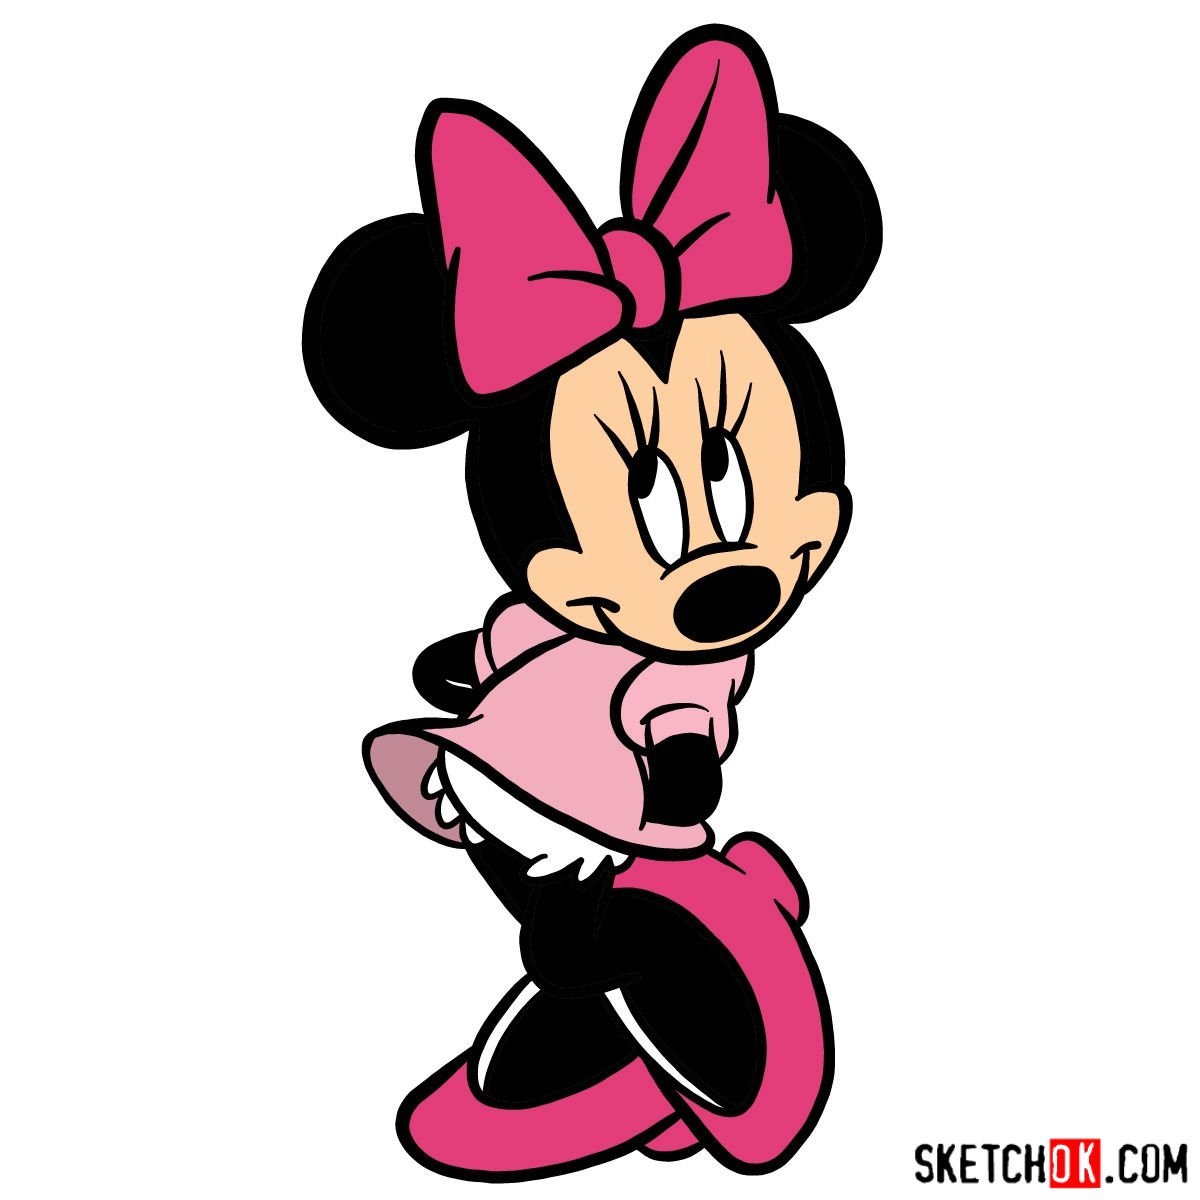 How to draw Minnie Mouse